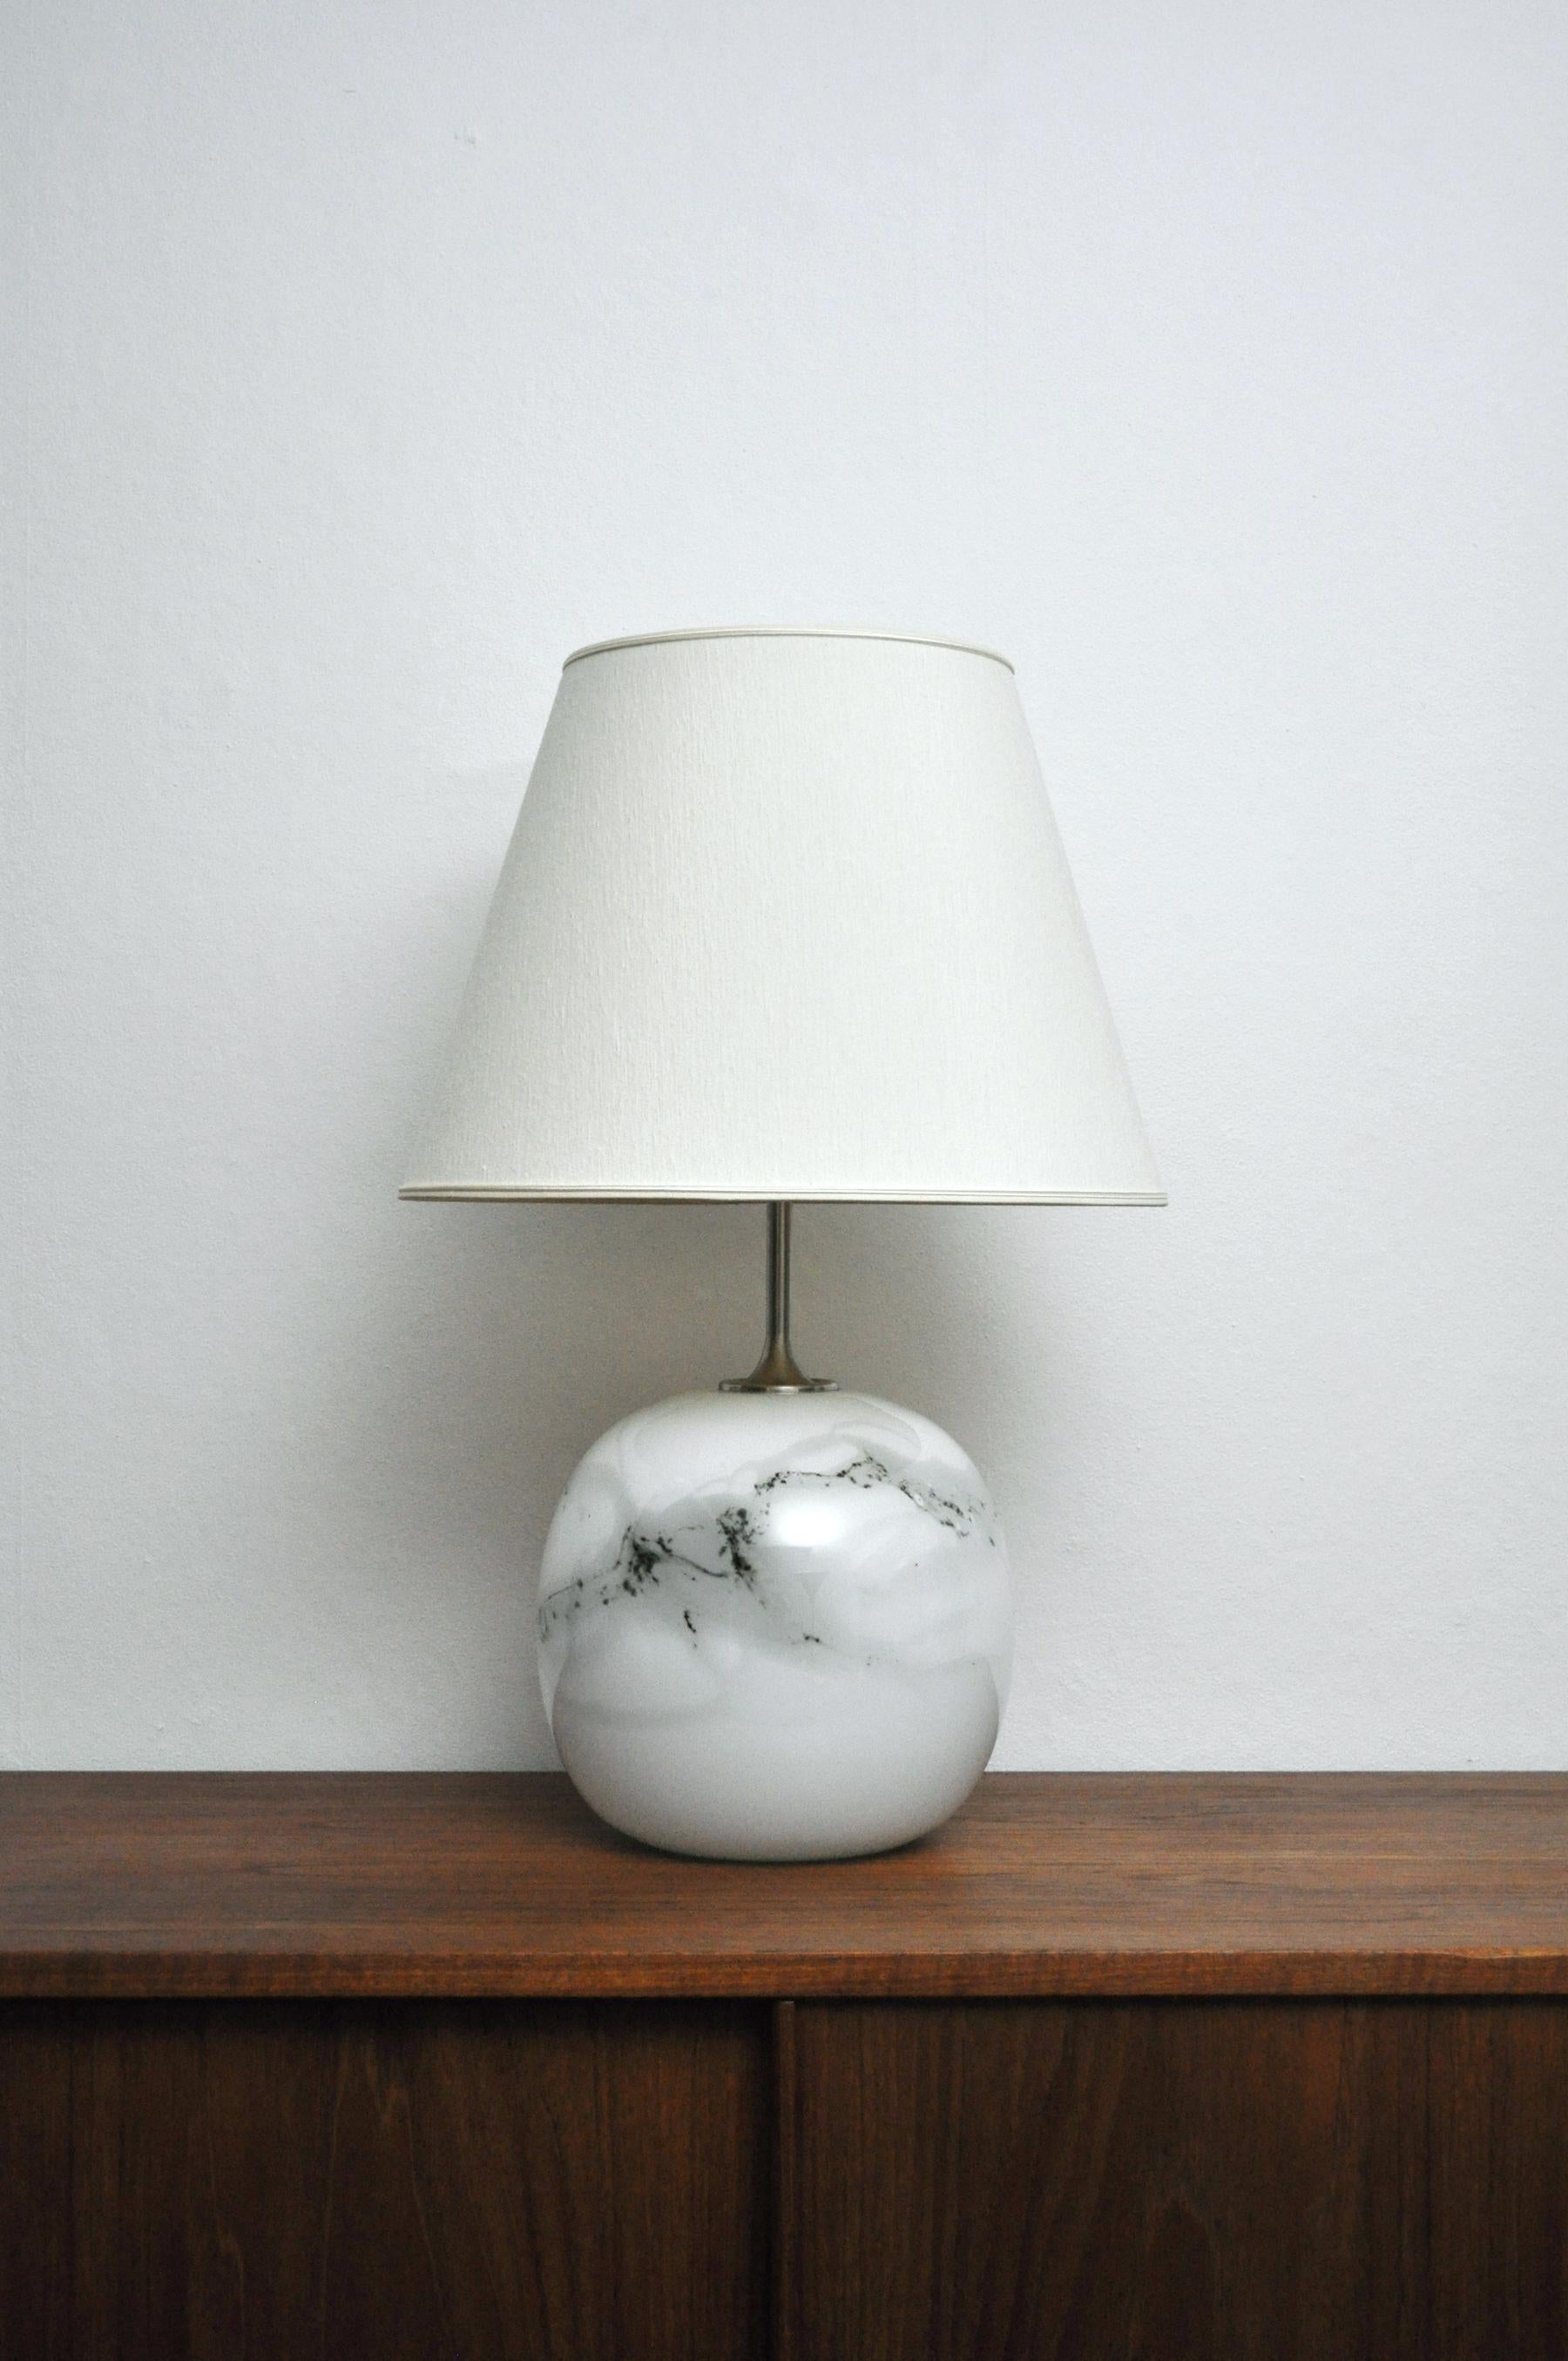 Large table lamp from the series 